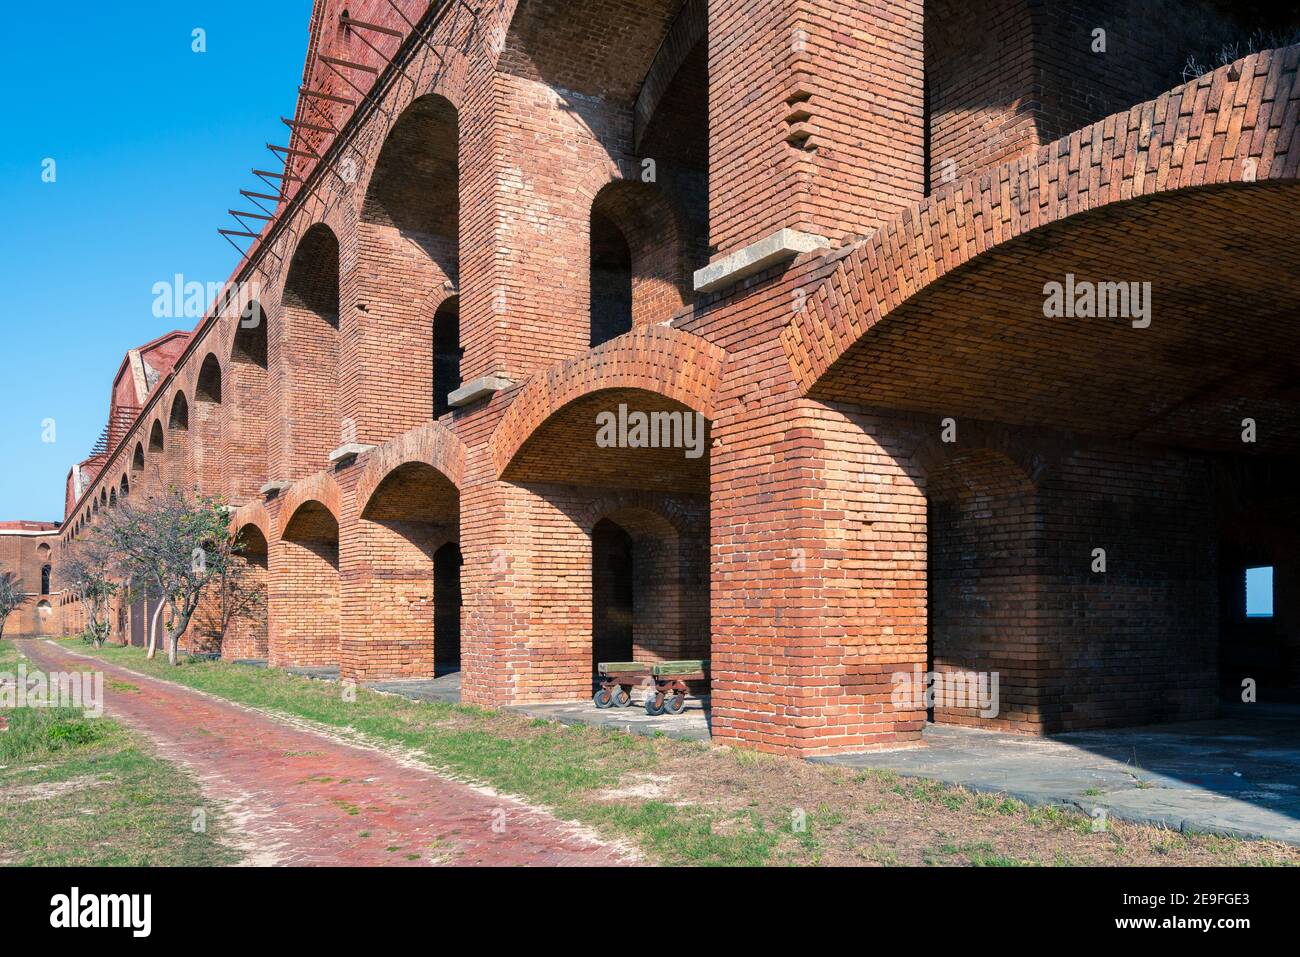 Archway of an old military fort in Florida. Large brick construction, Fort Jefferson, FL. Stock Photo